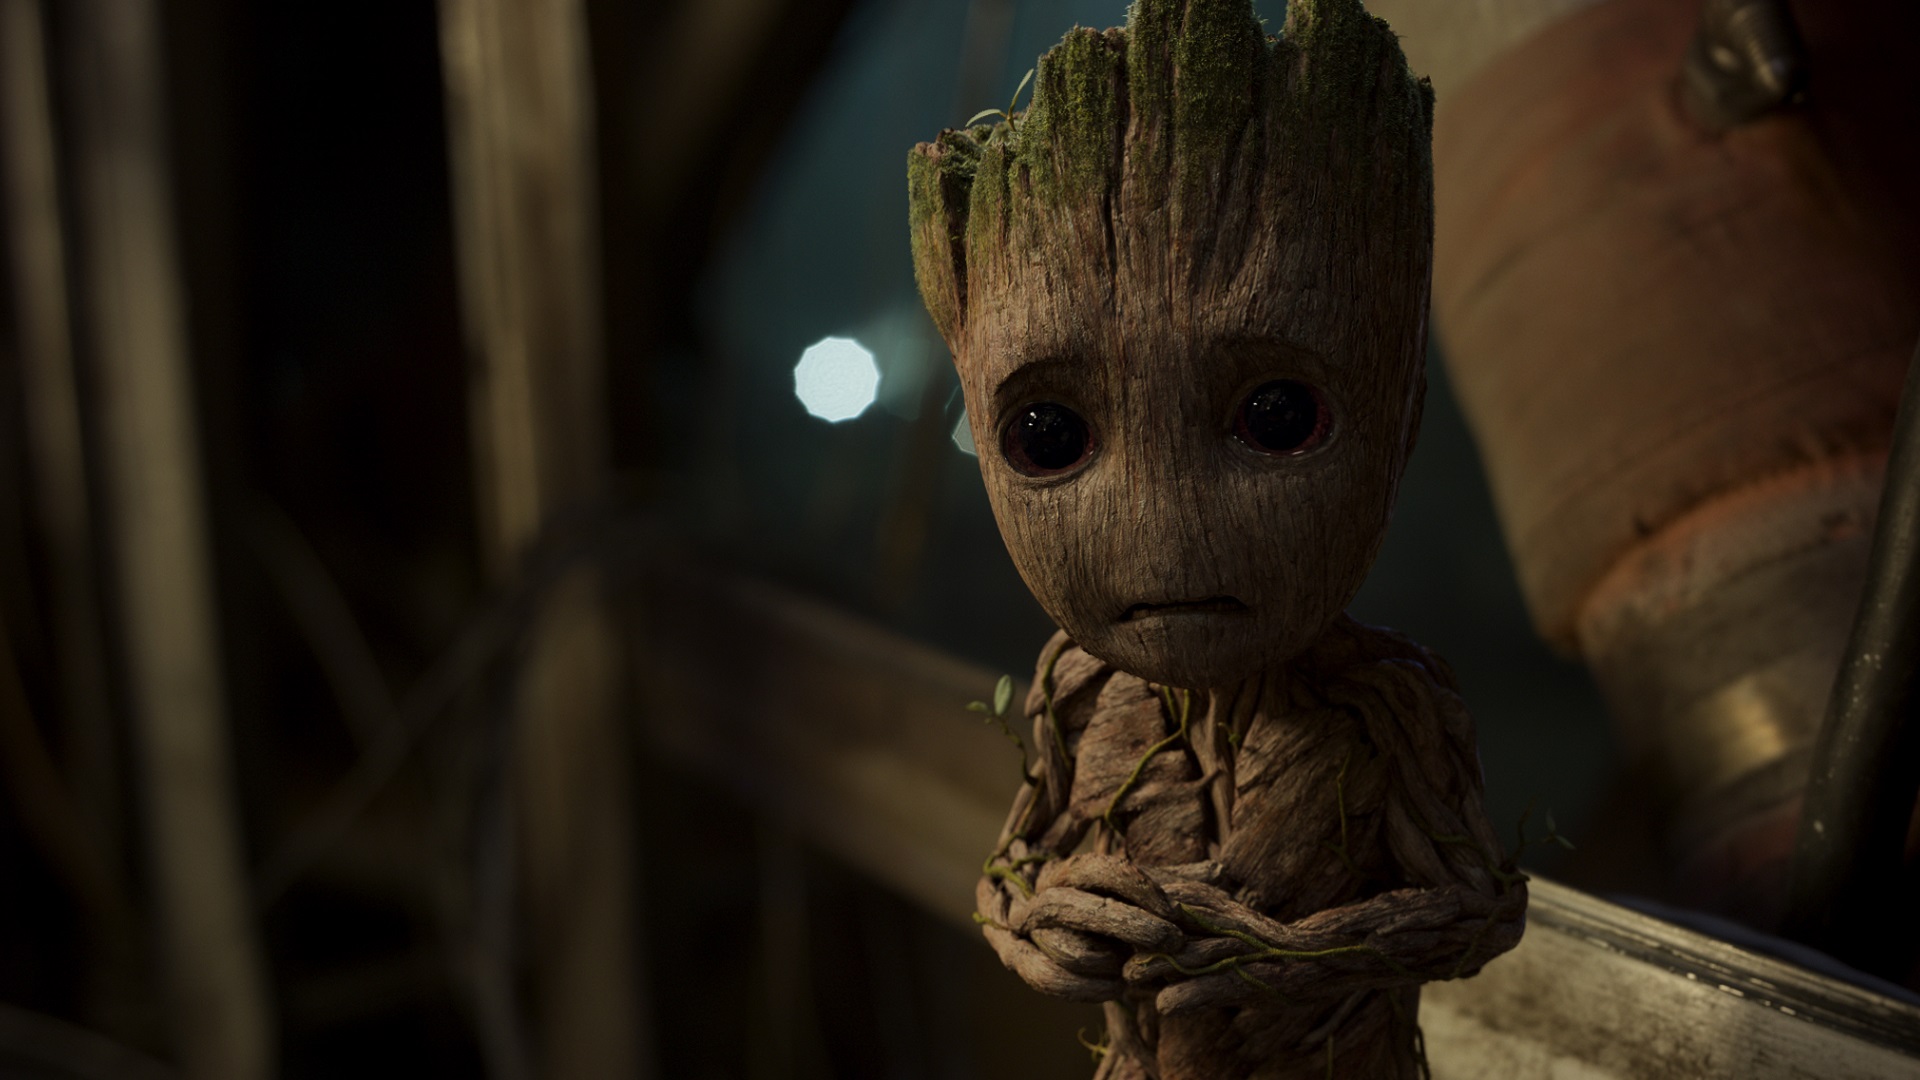 General 1920x1080 Groot Guardians of the Galaxy Vol. 2 Guardians of the Galaxy movies Marvel Comics Marvel Cinematic Universe